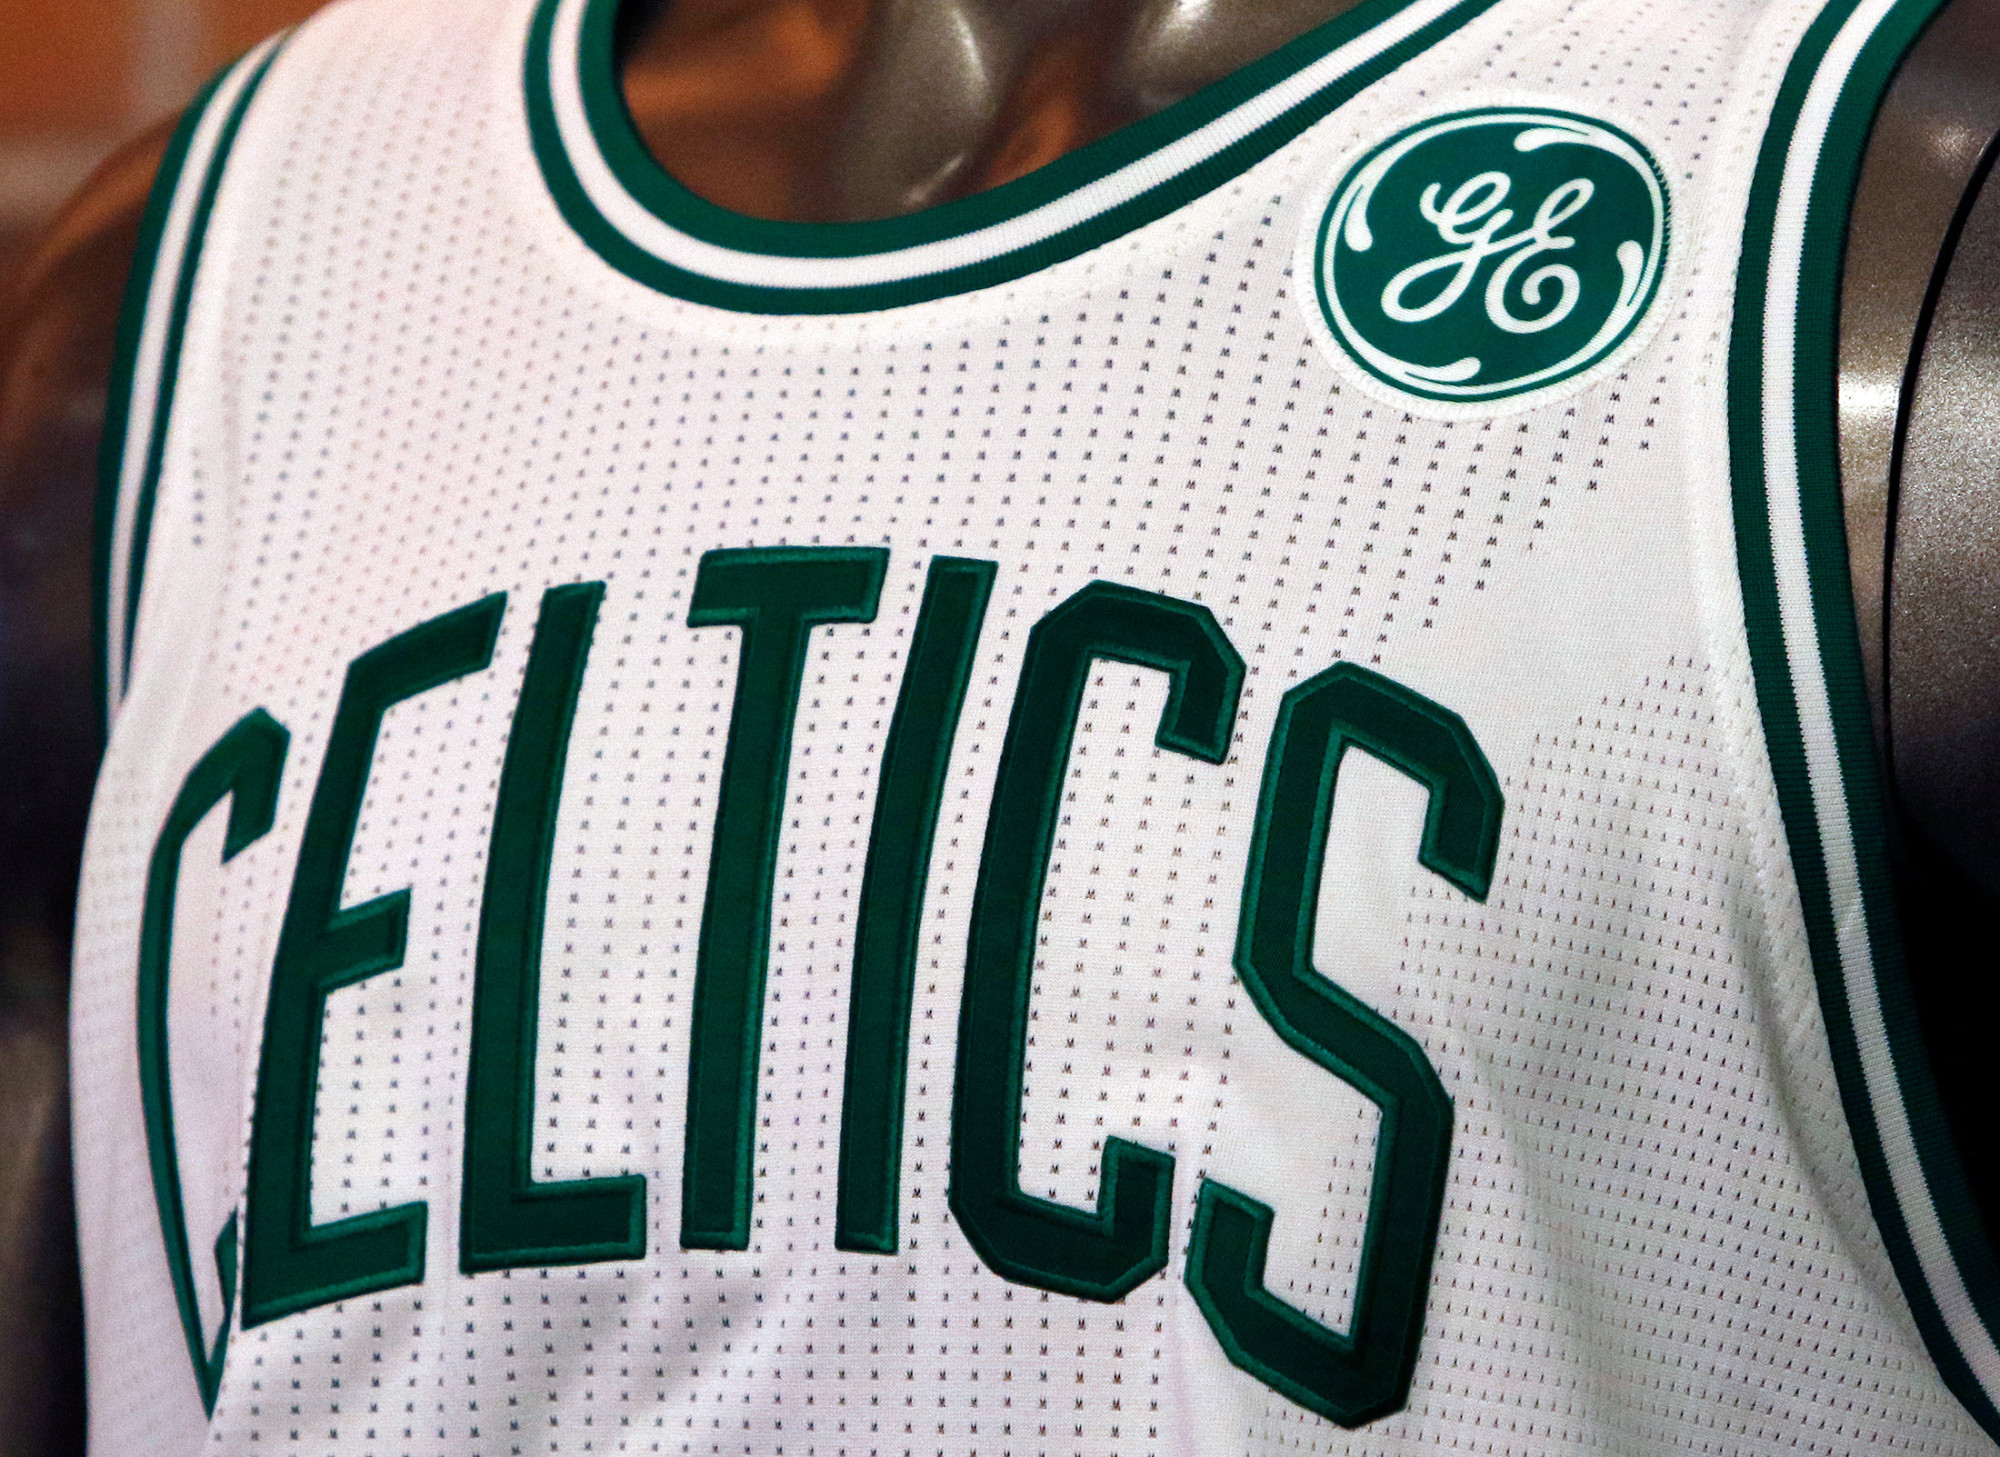 Sources: Celtics New Jersey Patch Deal With GE Is Worth More Than $7M  Annually